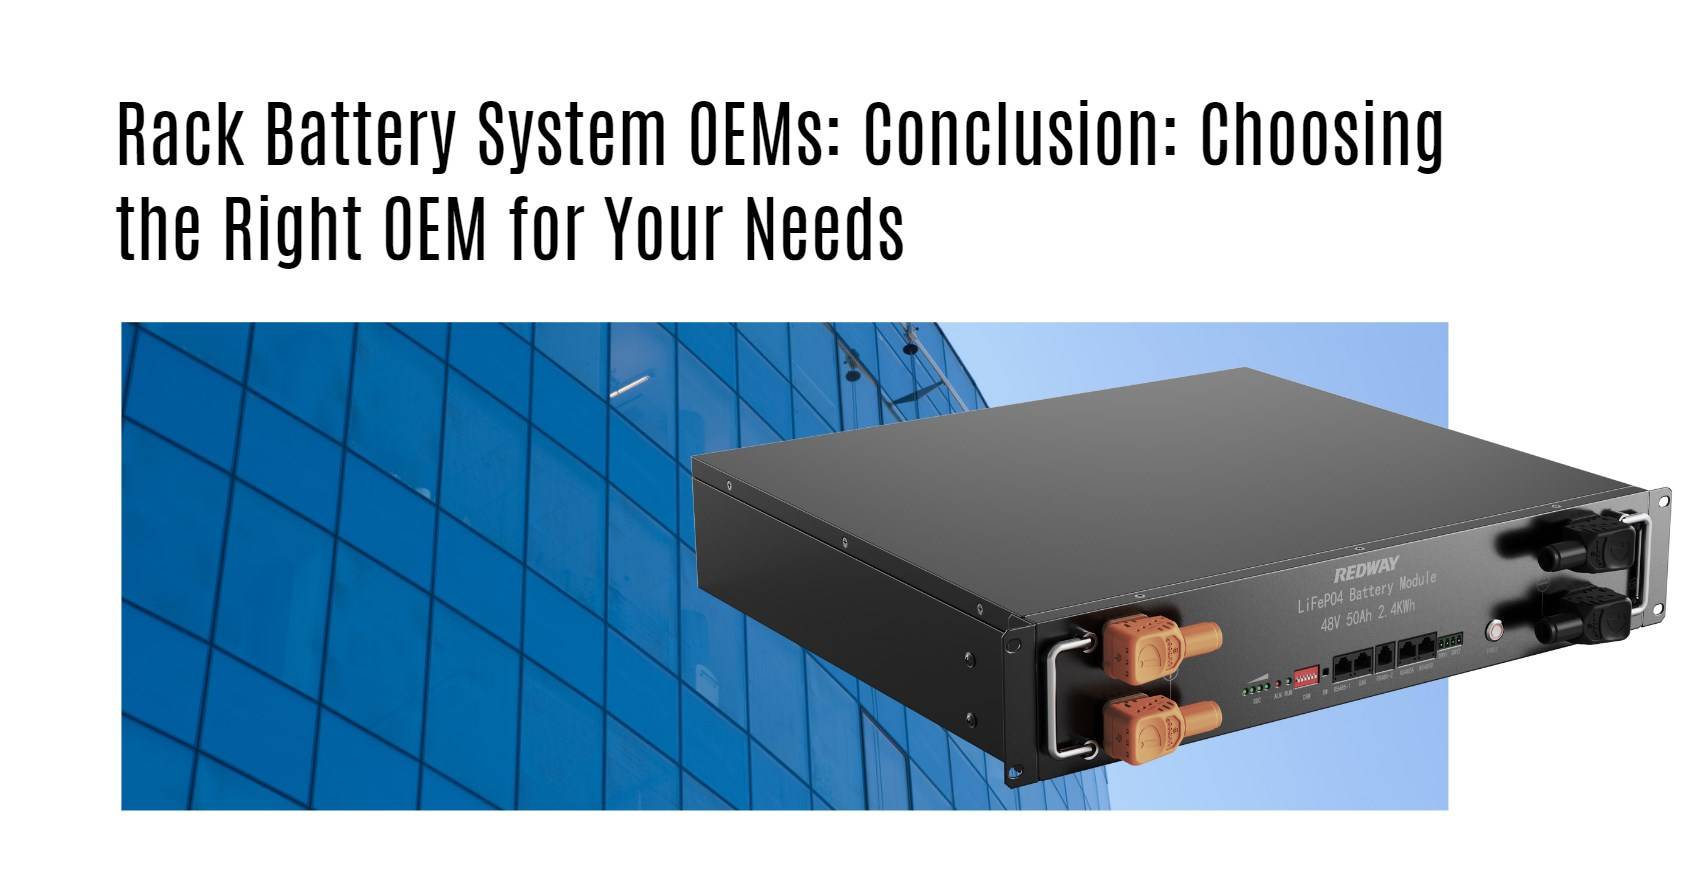 Conclusion: Choosing the Right OEM for Your Needs